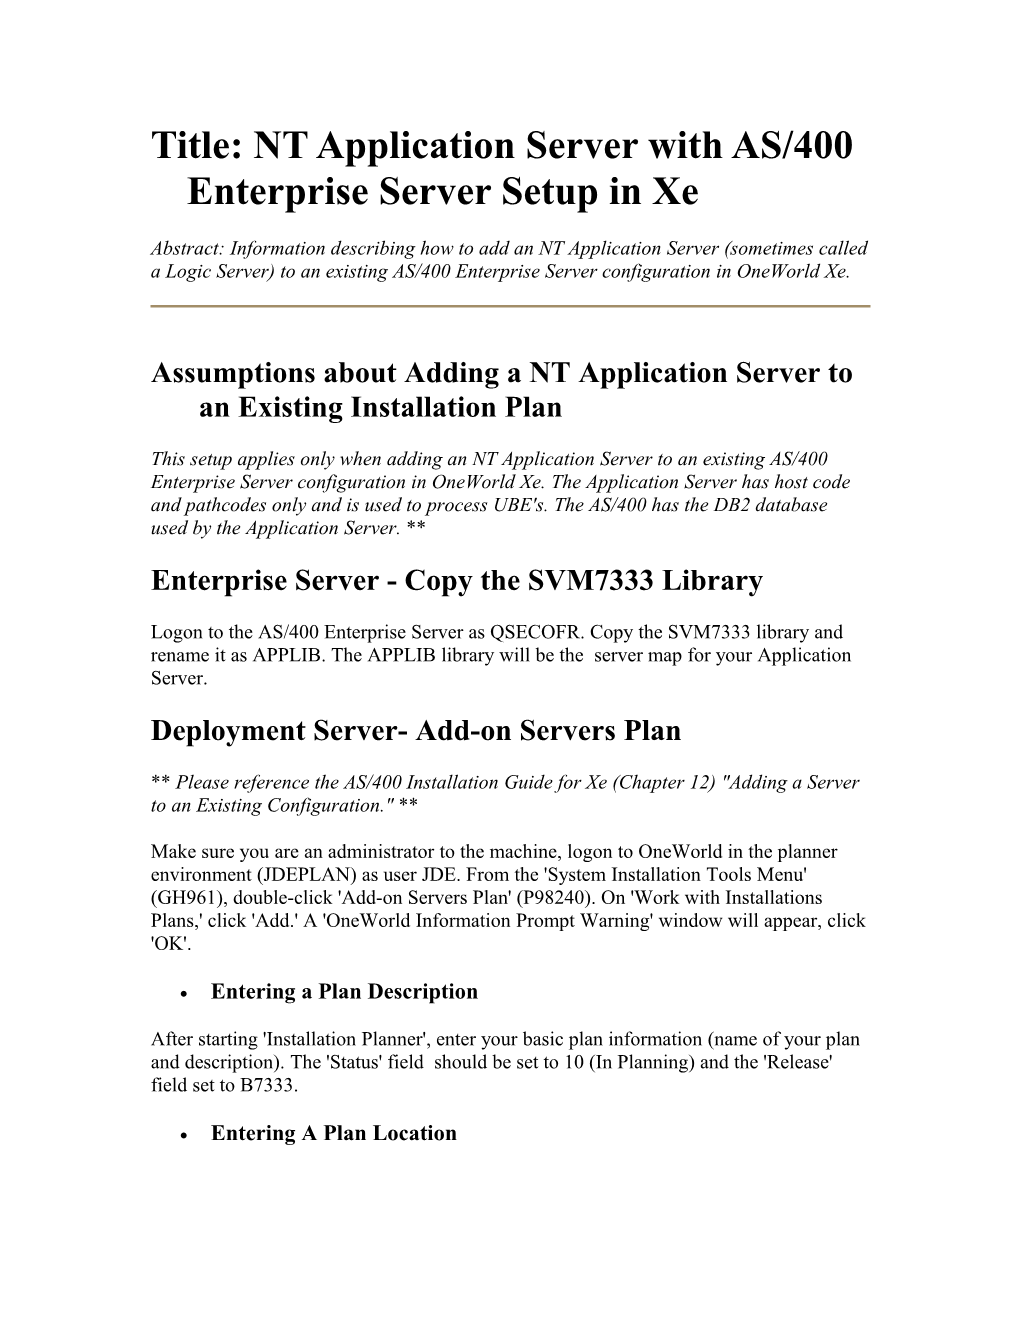 Title: NT Application Server with AS/400 Enterprise Server Setup in Xe